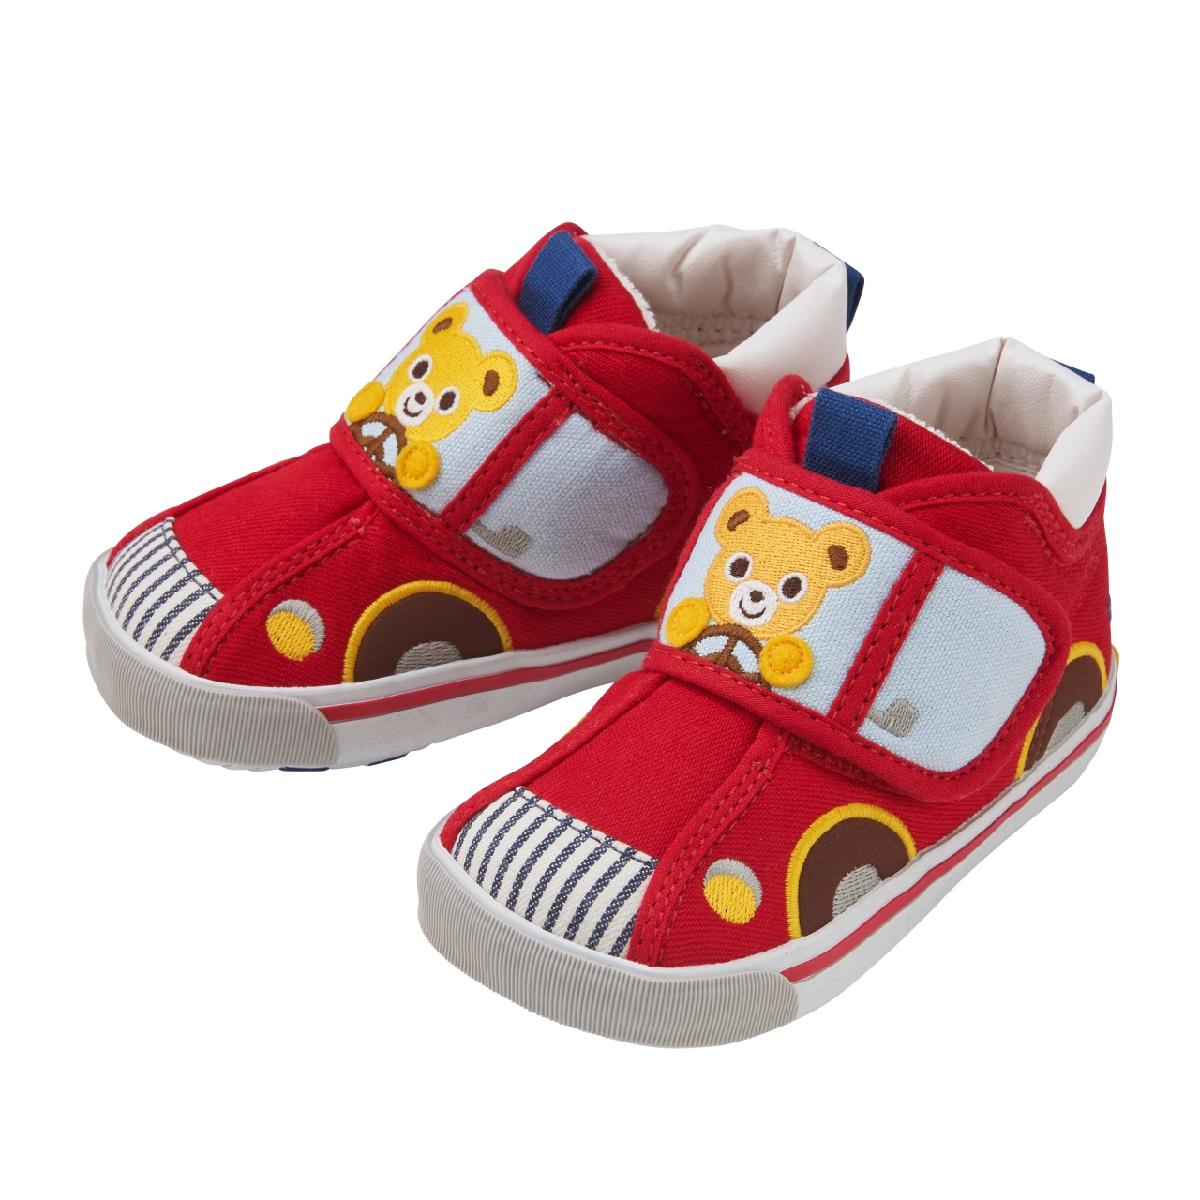 Sizes 12-14.5cm New Miki House Children's Red Strap Shoes 